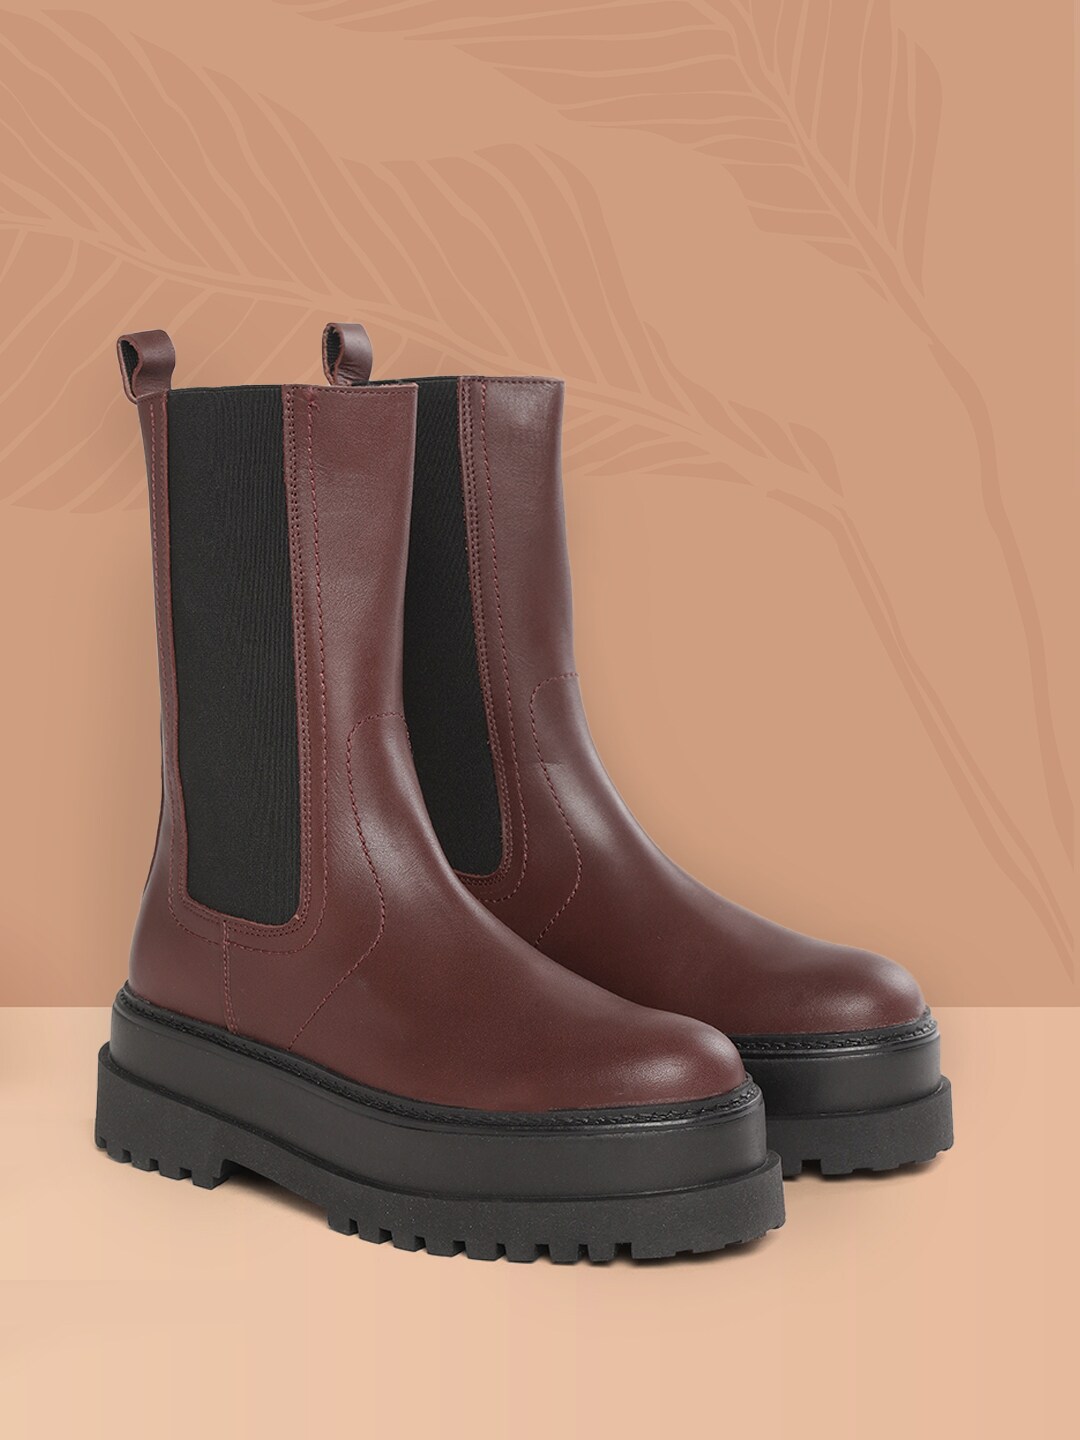 MANGO Women Burgundy Solid Leather High-Top Flatform Heeled Boots Price in India